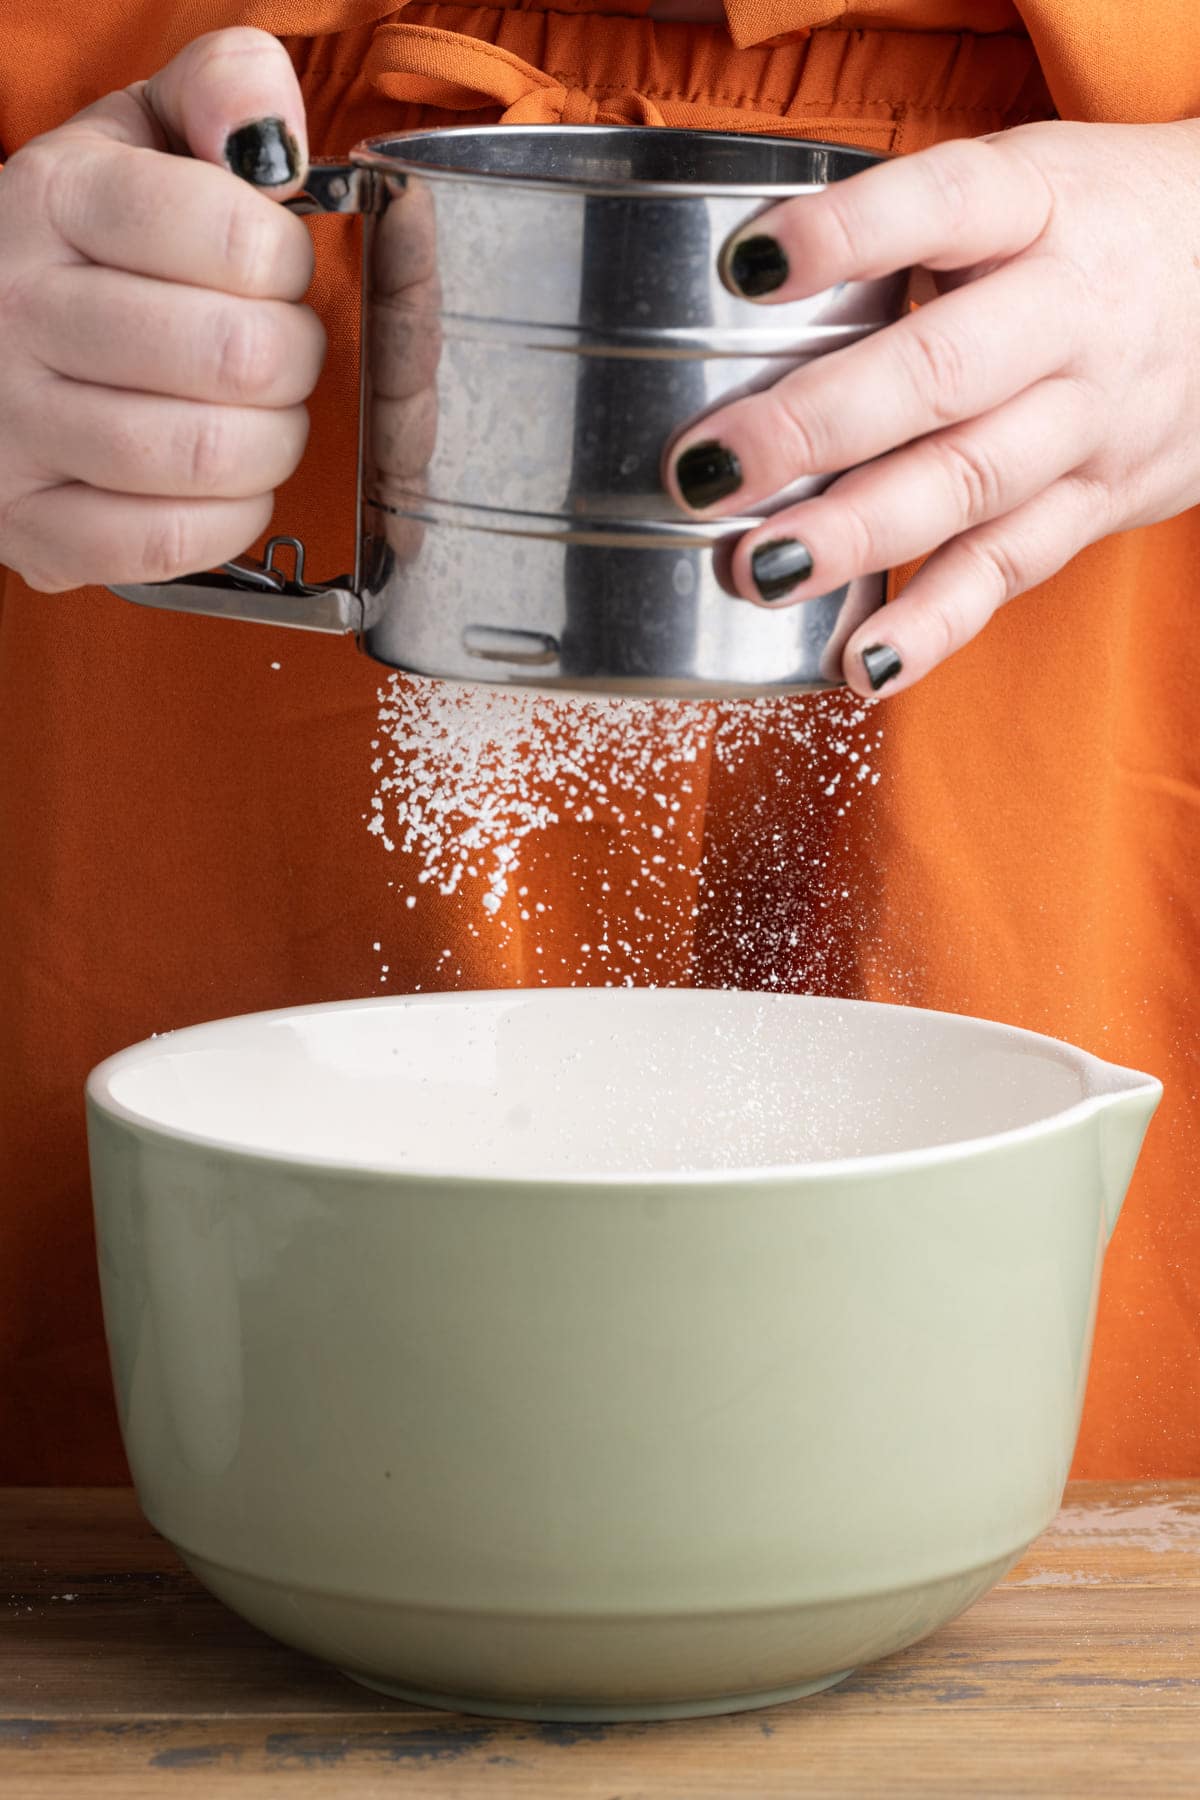 Sifting powdered sugar into a ceramic mixing bowl with cold whipping cream